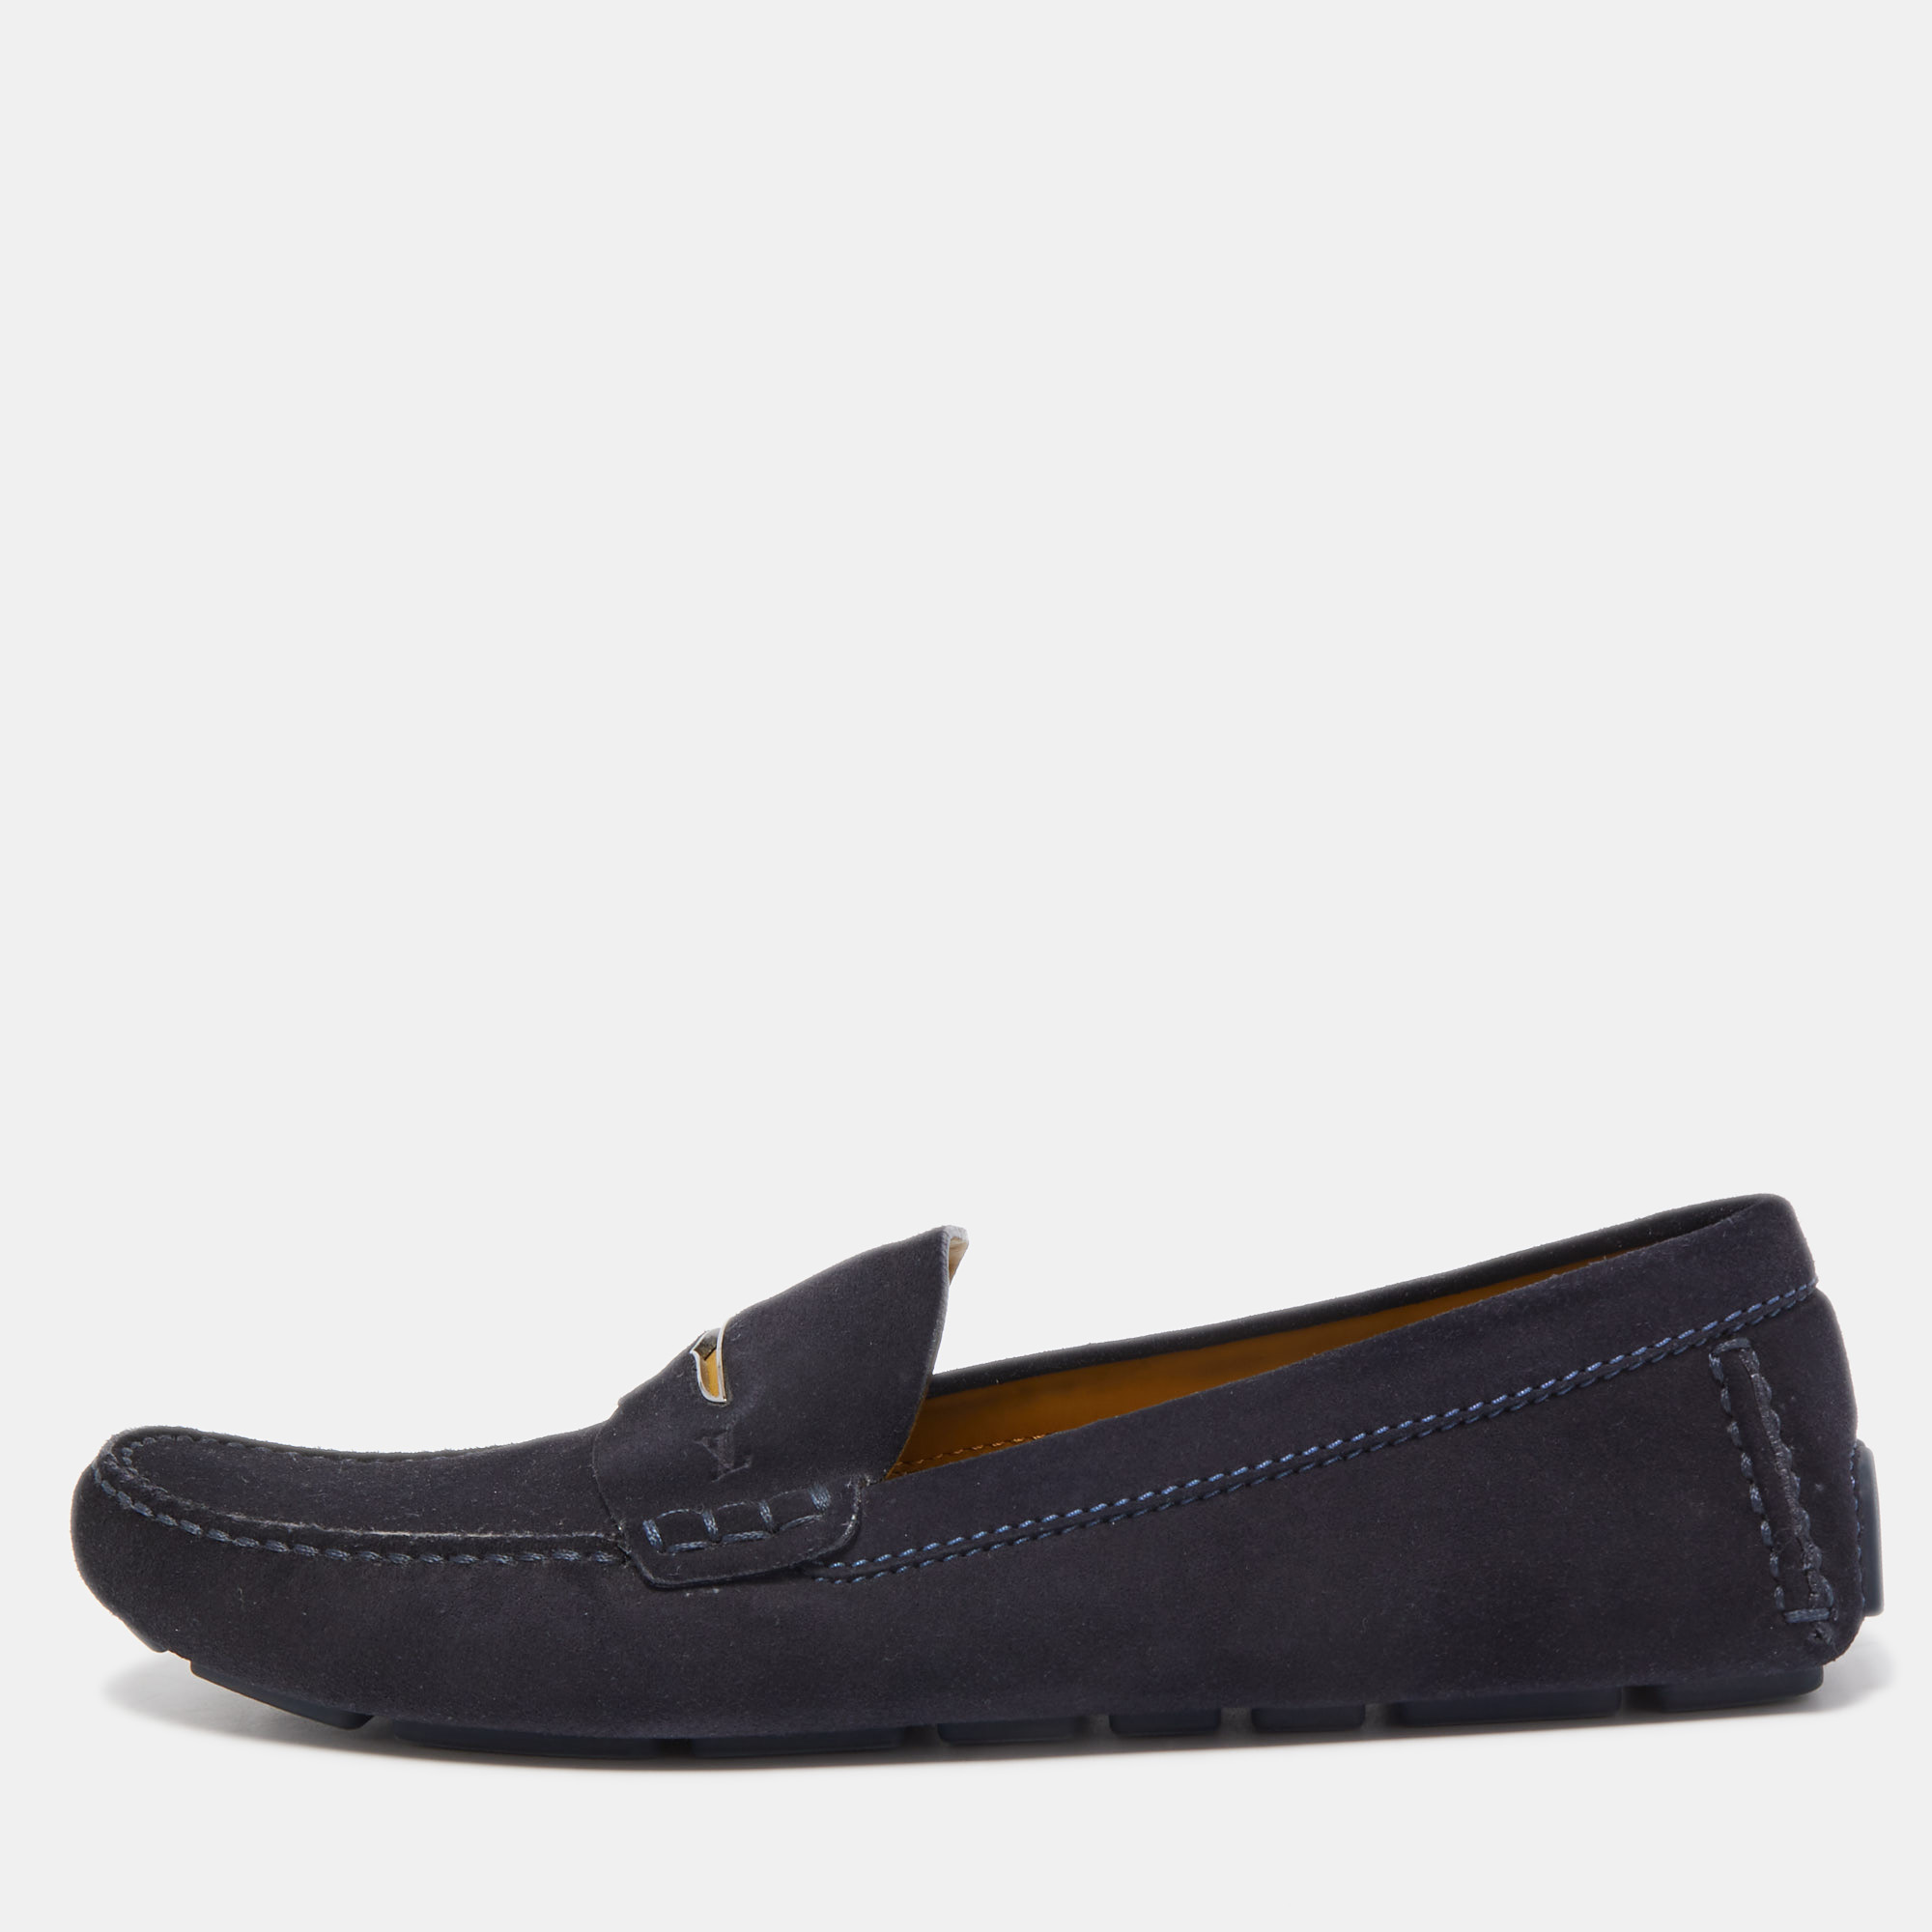 Louis vuitton navy blue suede slip on loafers size 44.5